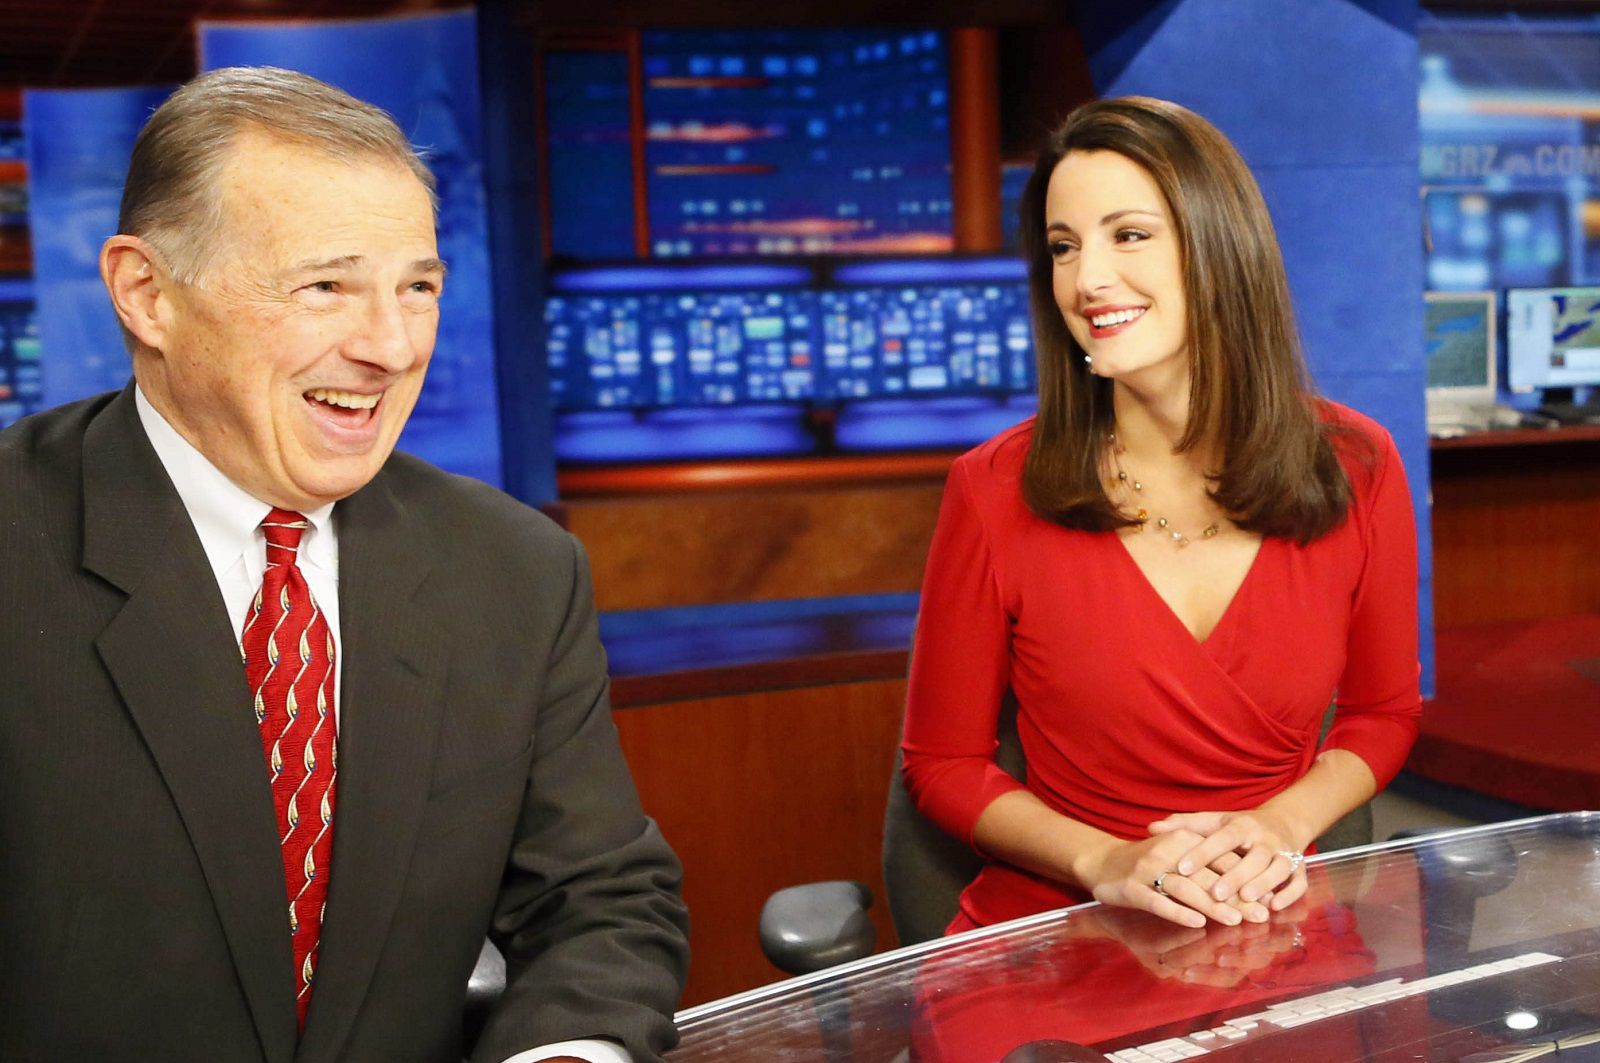 WGRZ is big winner in local news ratings during February sweeps image